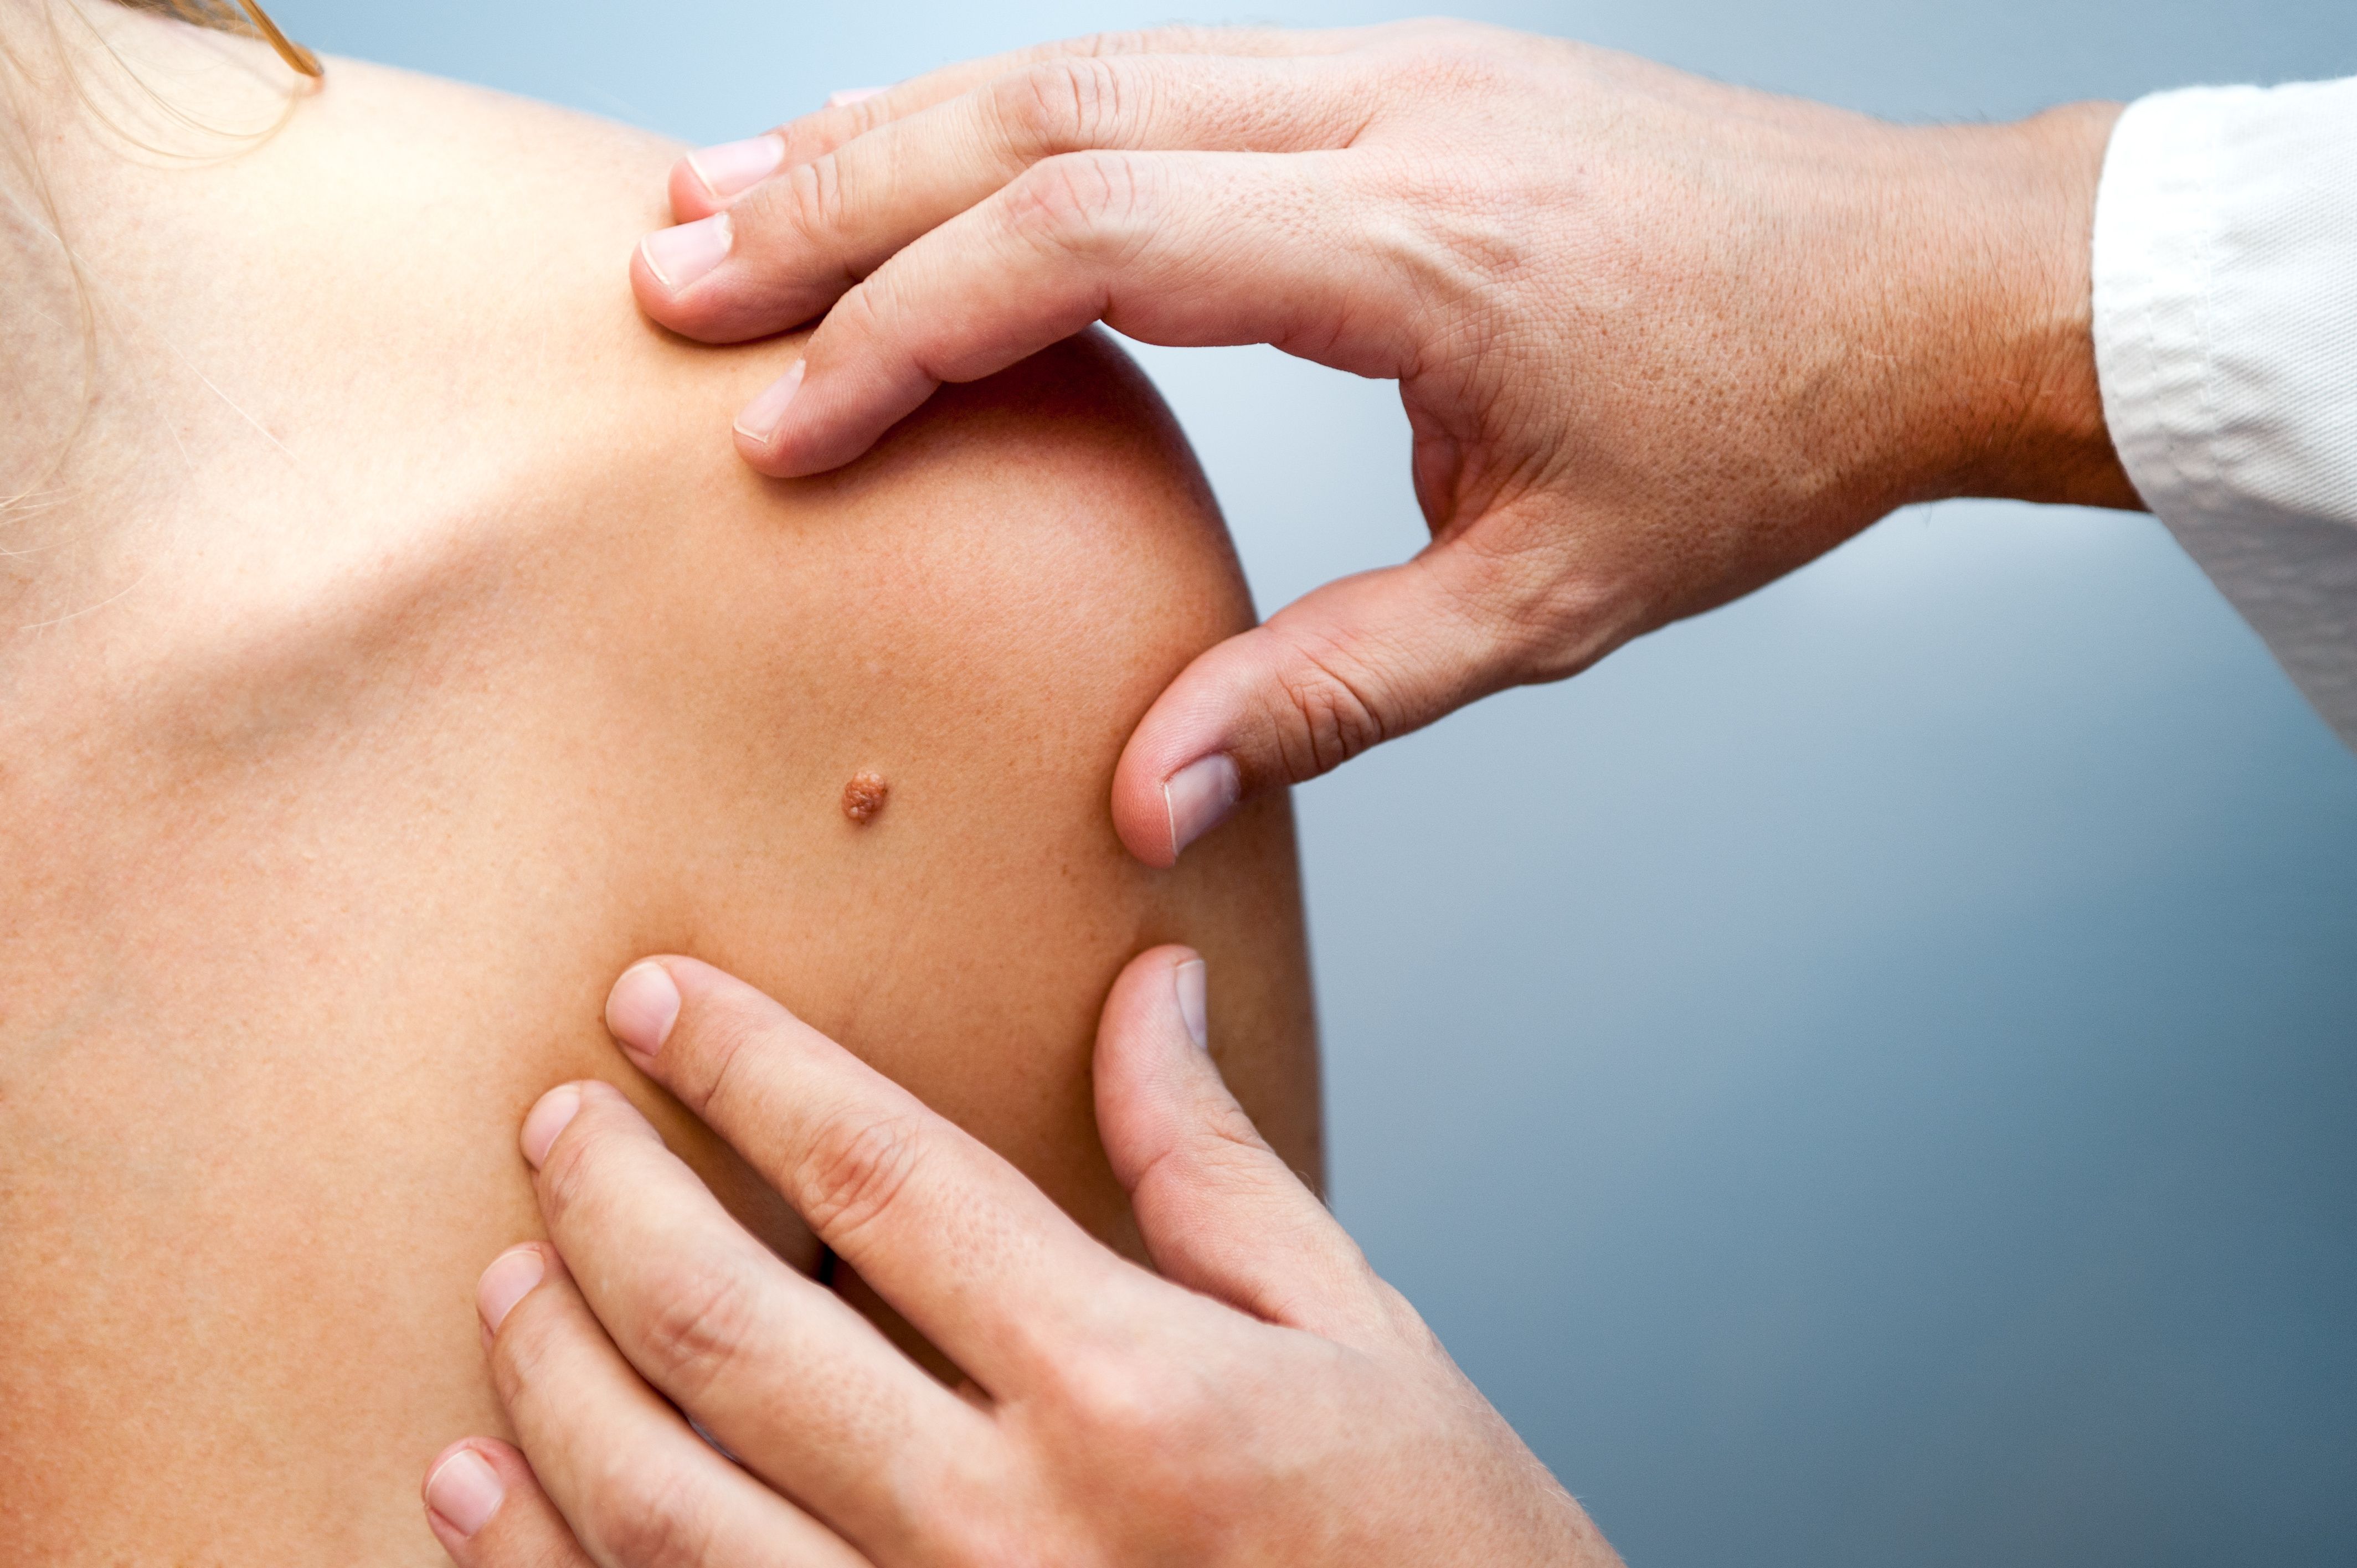 Skin cancer risk may be associated with immunosuppressant medication, although multiple studies exploring this relationship have not drawn concrete conclusions | image credit: Damian Gretka - stock.adobe.com